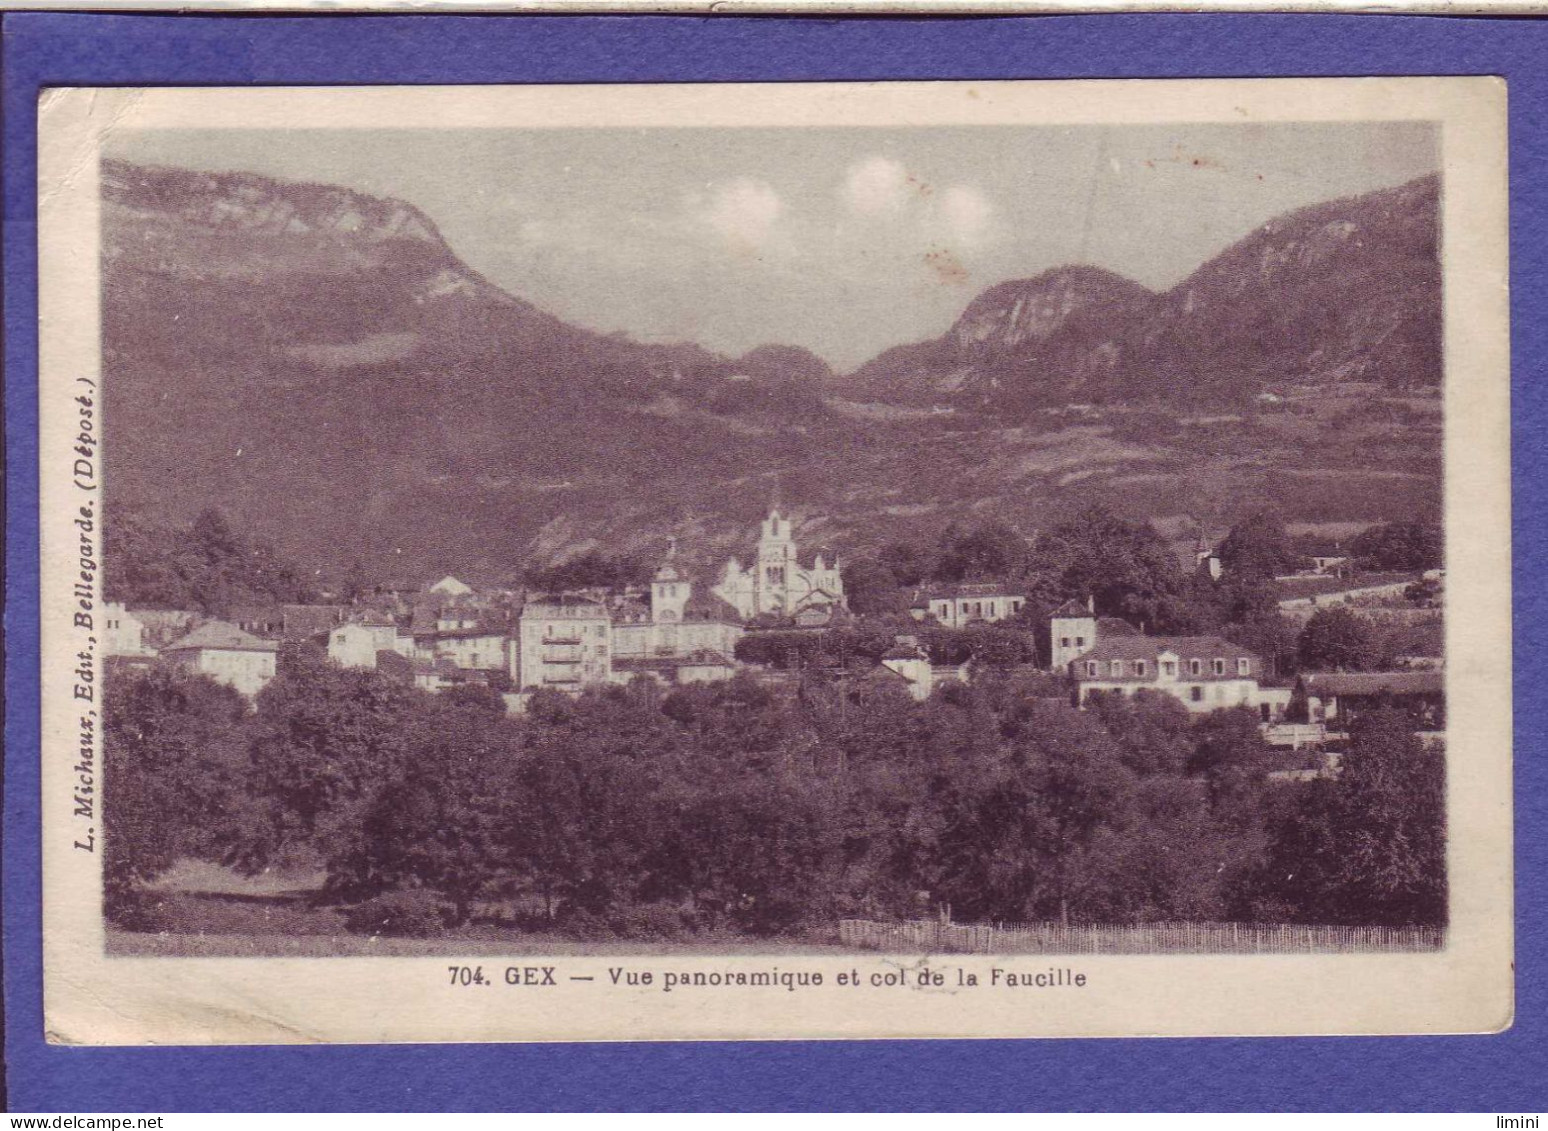 01 - GEX  - PANORAMA COL DE LE FAUCILLE  - - Gex